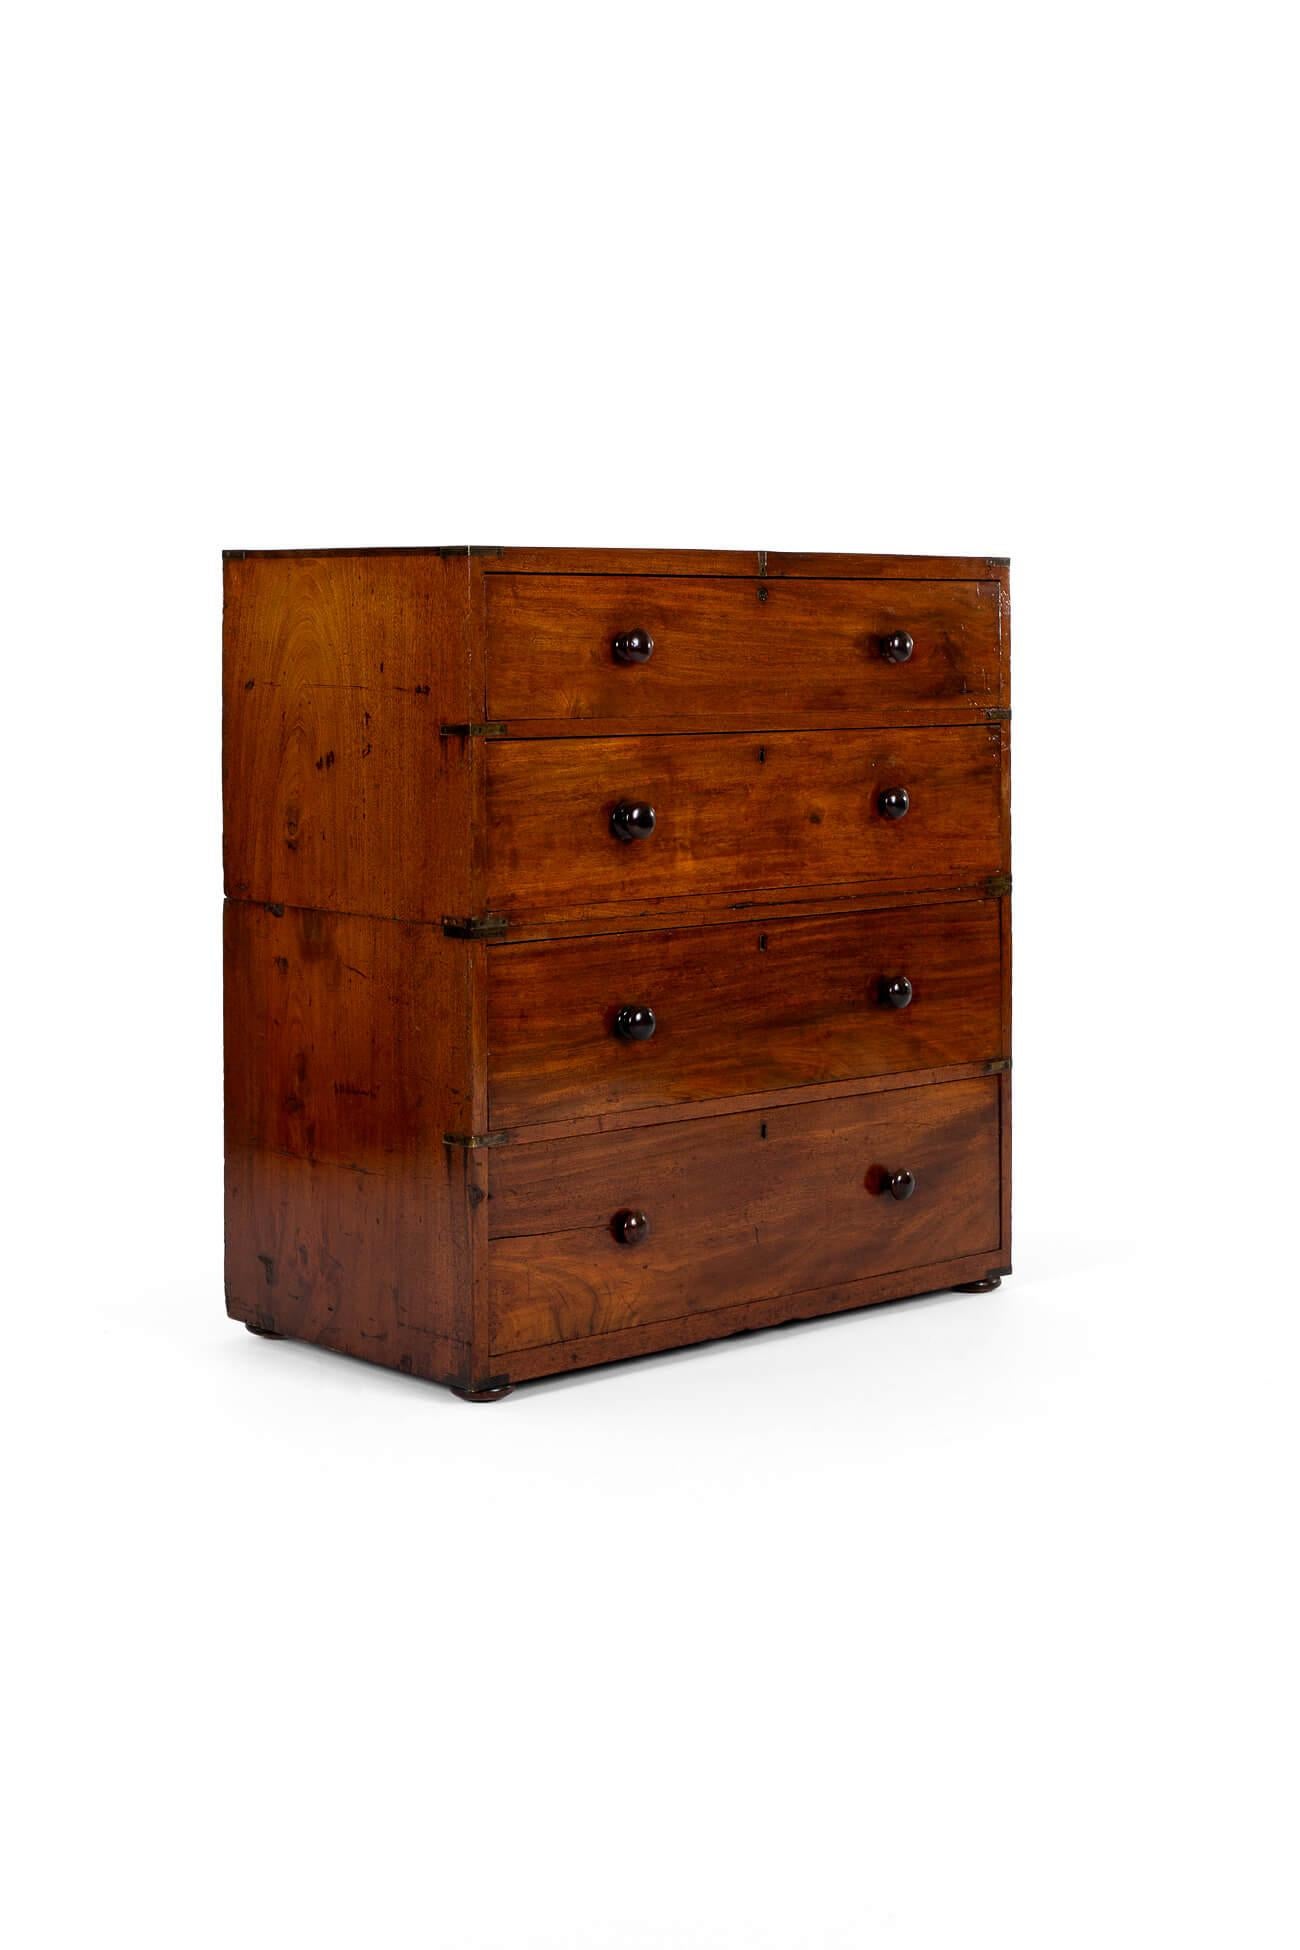 A superb gentleman’s Victorian brass bound campaign chest in mahogany.

The chest splits into two sections, the upper displaying a caddy top and two long drawers. The lower also features two long drawers raised on bun feet. Mahogany handles to both